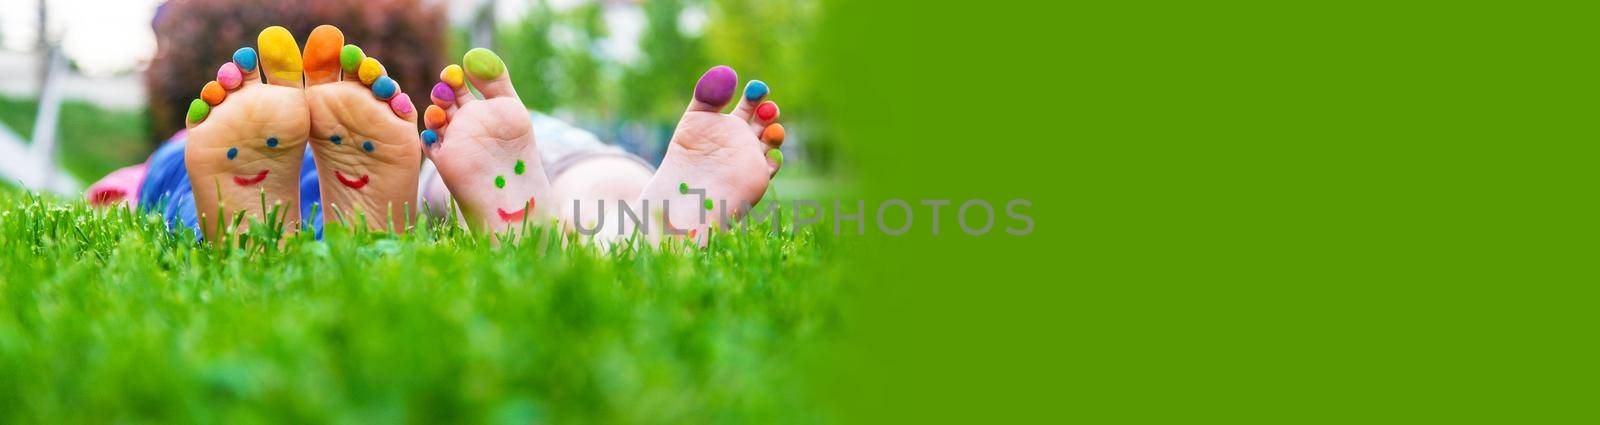 Children's feet with a pattern of paints smile on the green grass. Selective focus.child